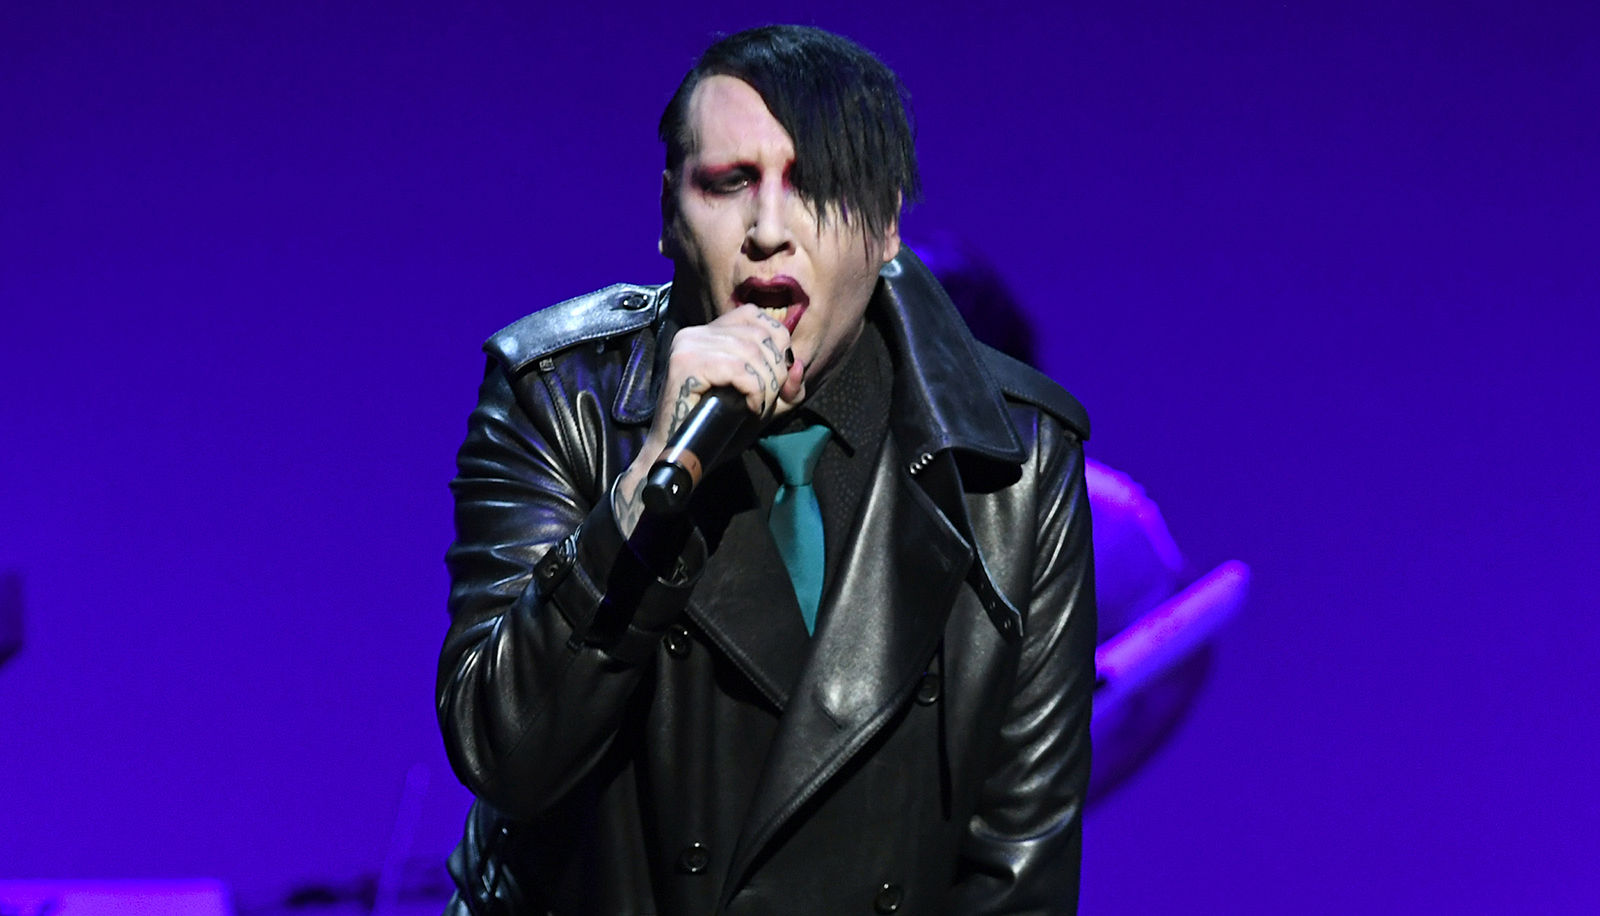 Marilyn Manson was under fire in the court of public opinion after abuse allegations by Evan Rachel Wood. See how that may translate to a real court case.